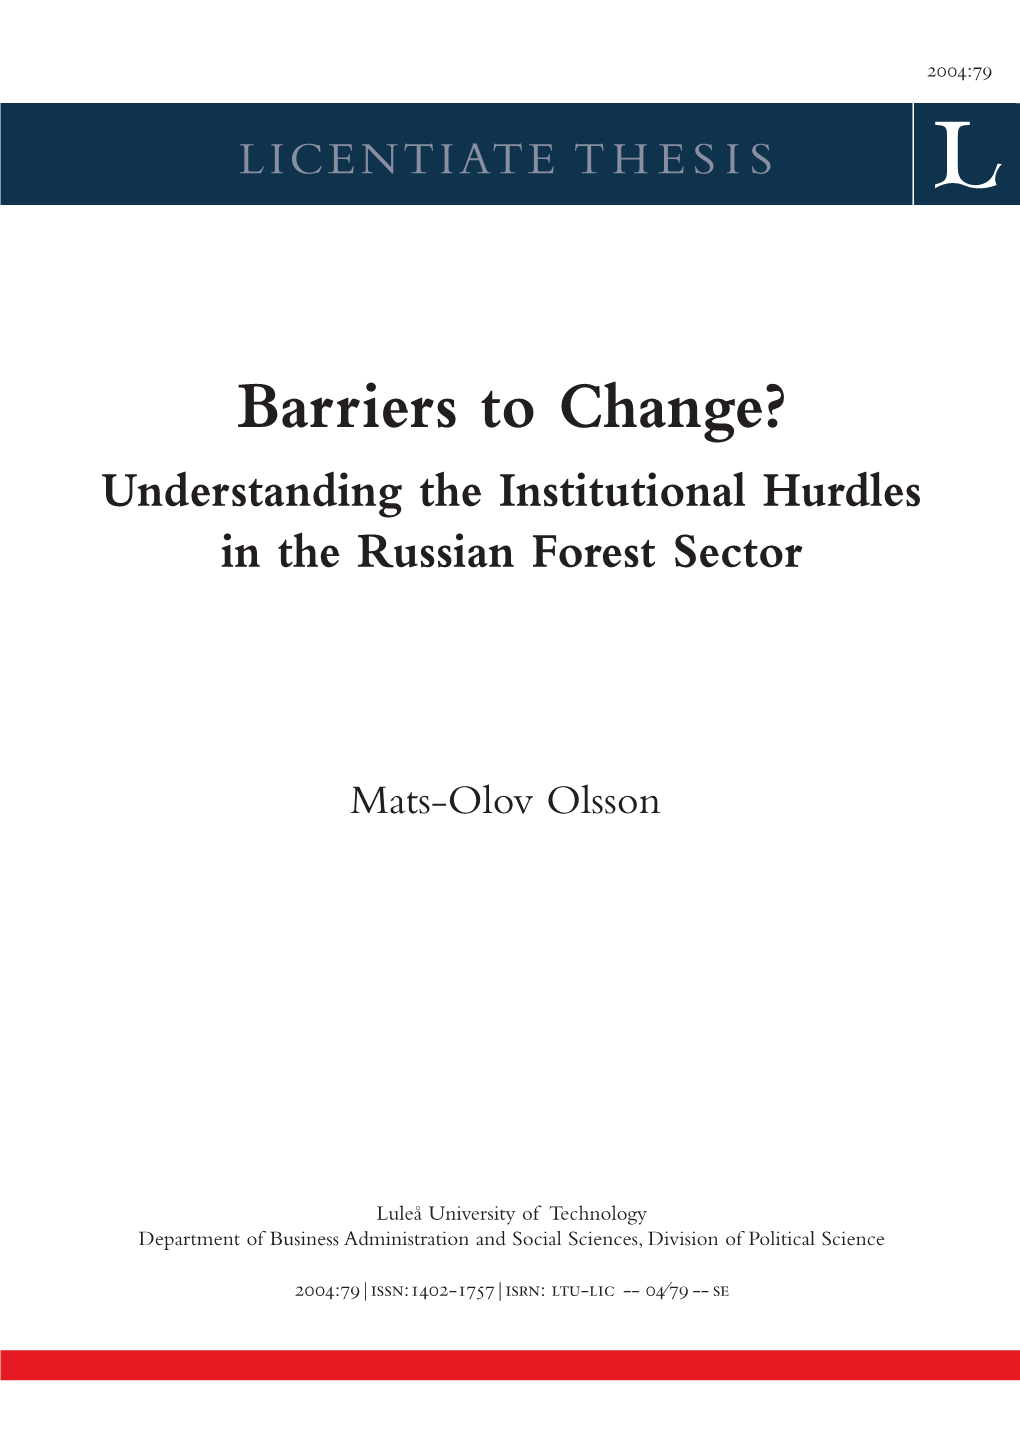 Understanding the Institutional Hurdles in the Russian Forest Sector